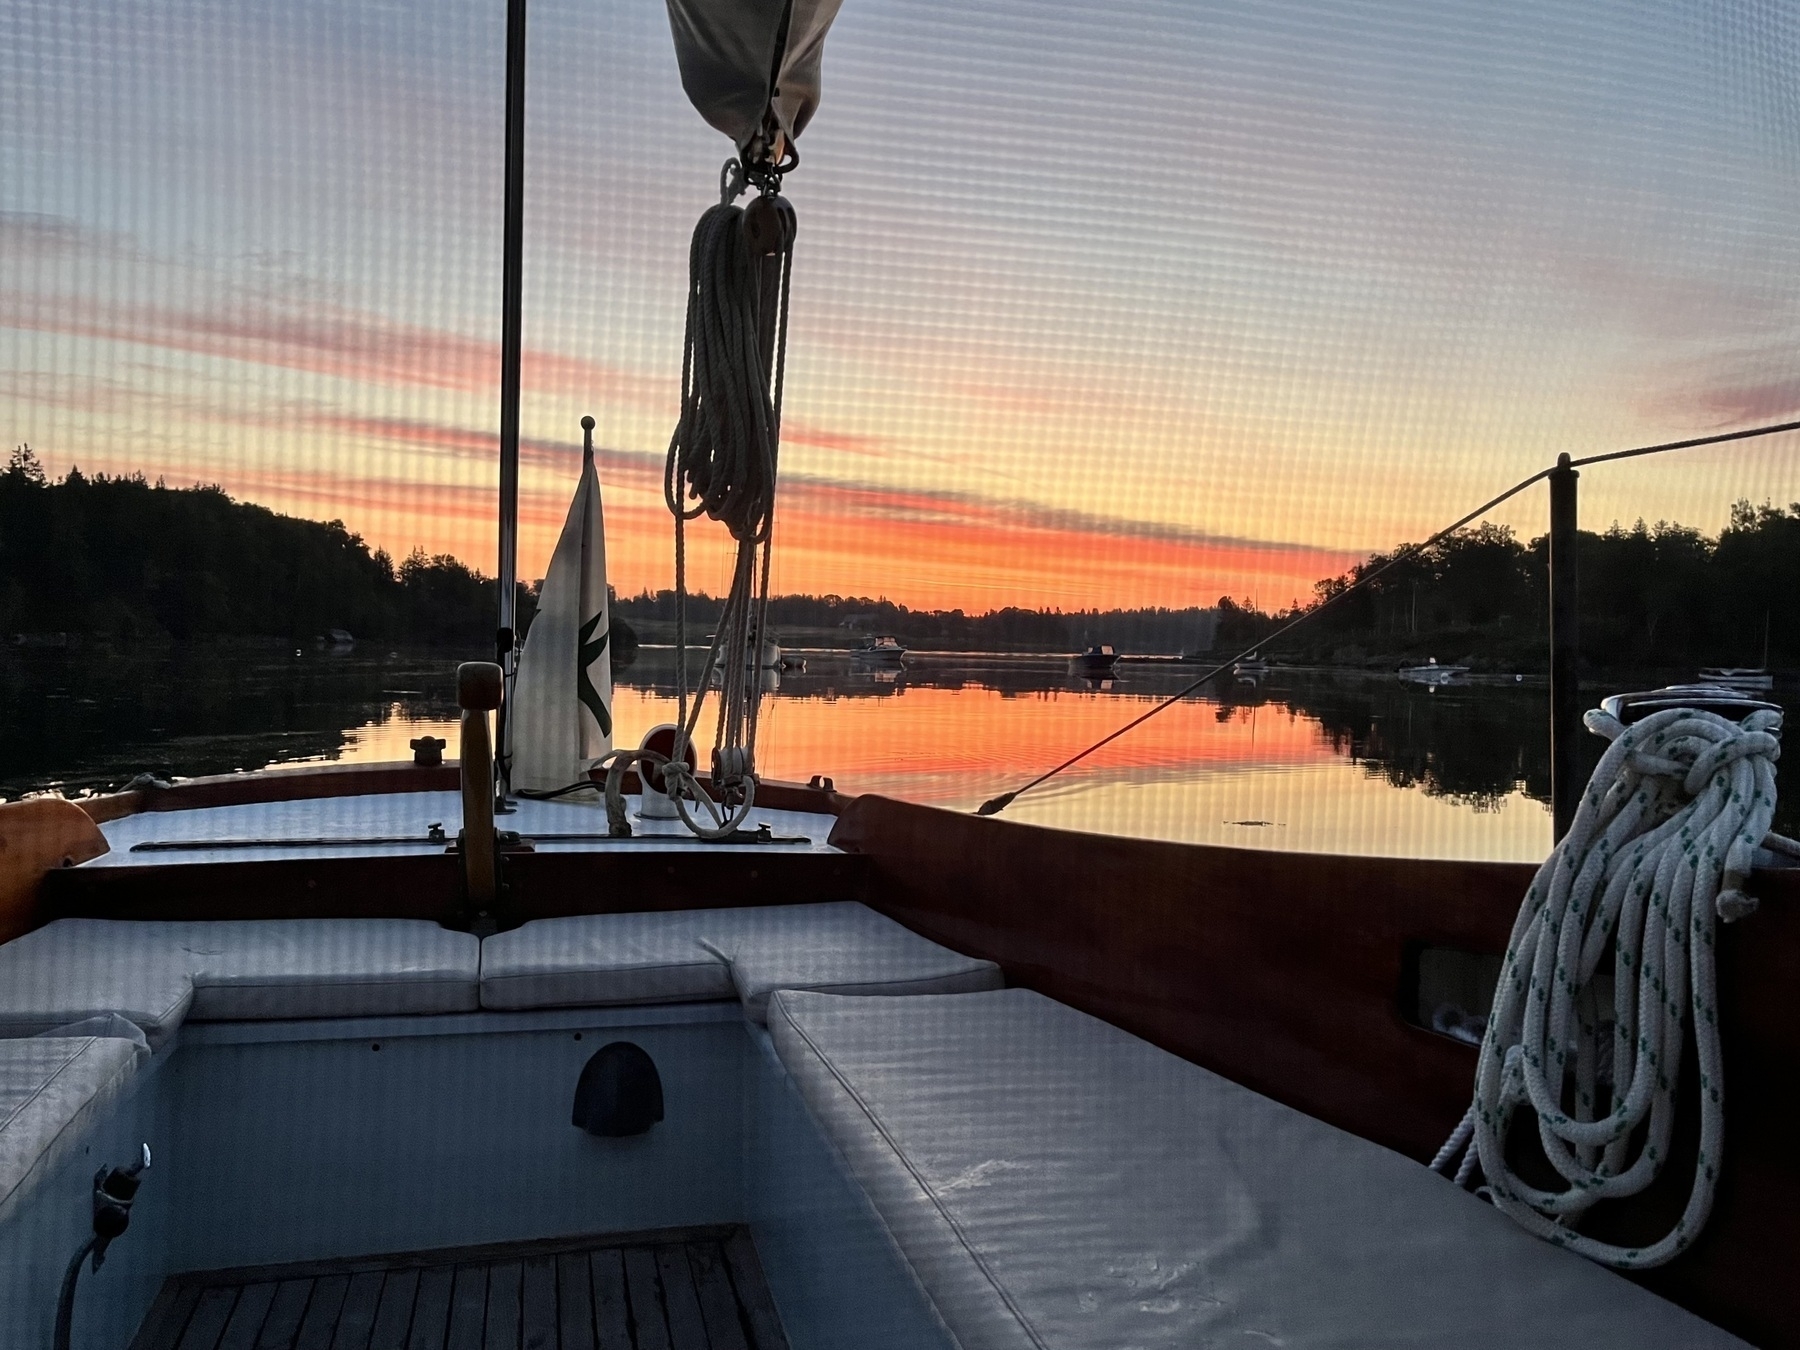 Glowing orange clouds reflected in water astern of sailboat